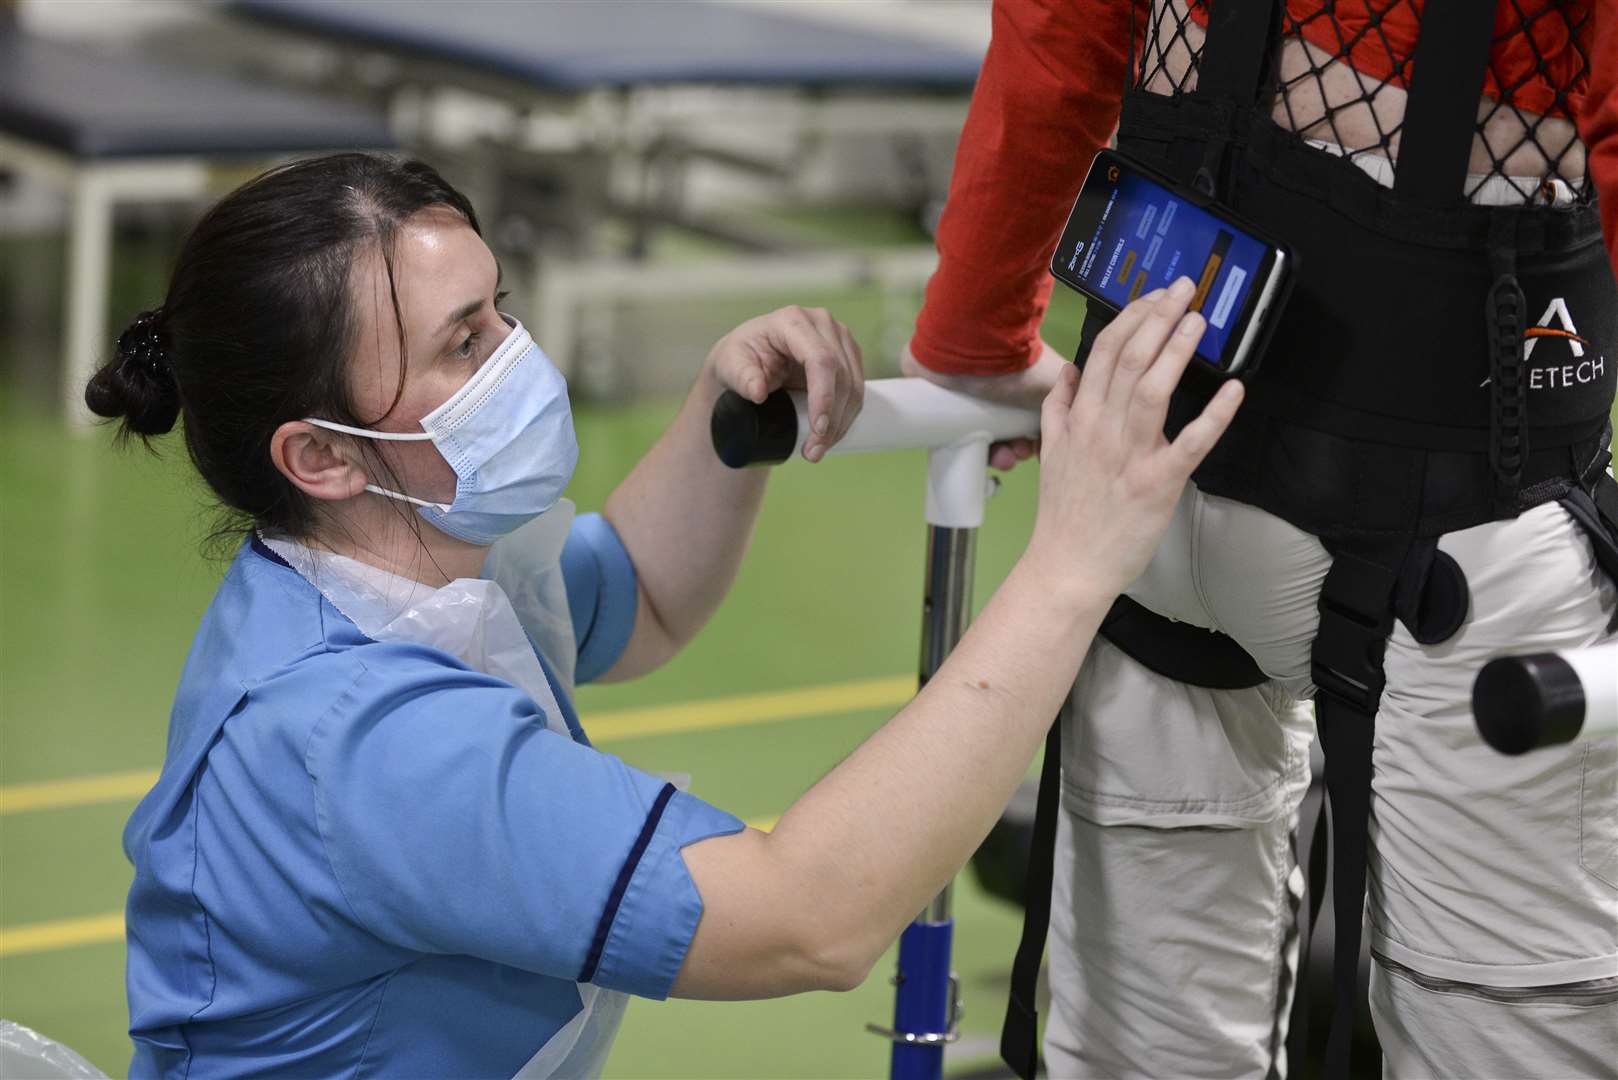 The ZeroG Gait and Balance System is a robotic apparatus where a patient is supported during therapy (Queen Elizabeth National Spinal Injuries Unit/PA)